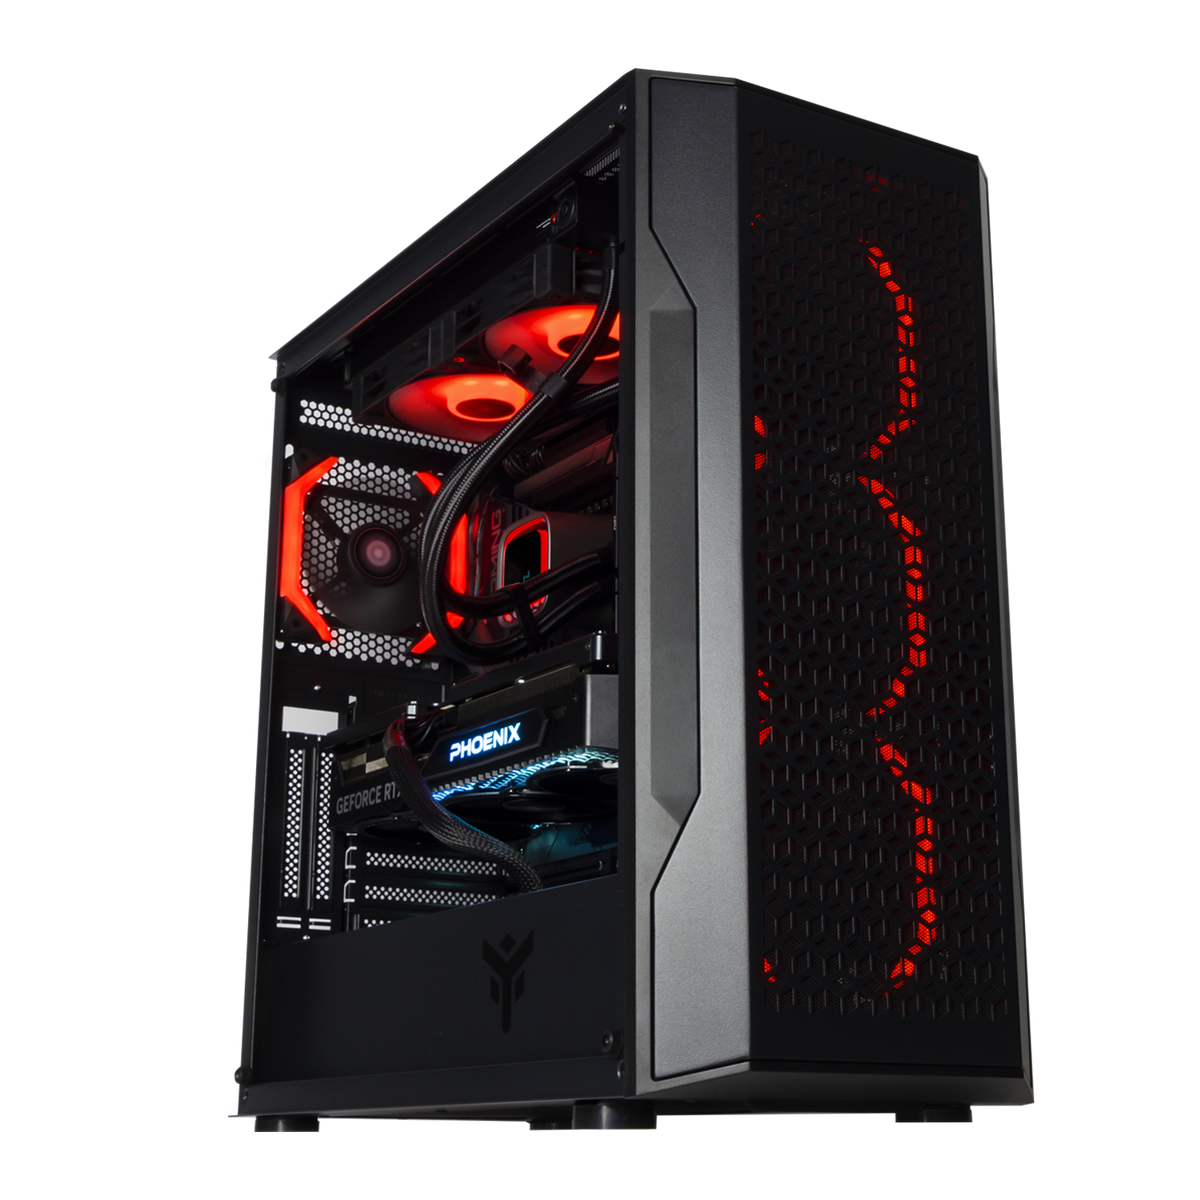 GAMING PC i9 12900K 16 CORE up to 5.20GHz, RTX 4070 12 GB, SSD NVME 1000 GB, RAM 32 GB DDR5, 240mm liquid cooler, WINDOWS 11 PRO 